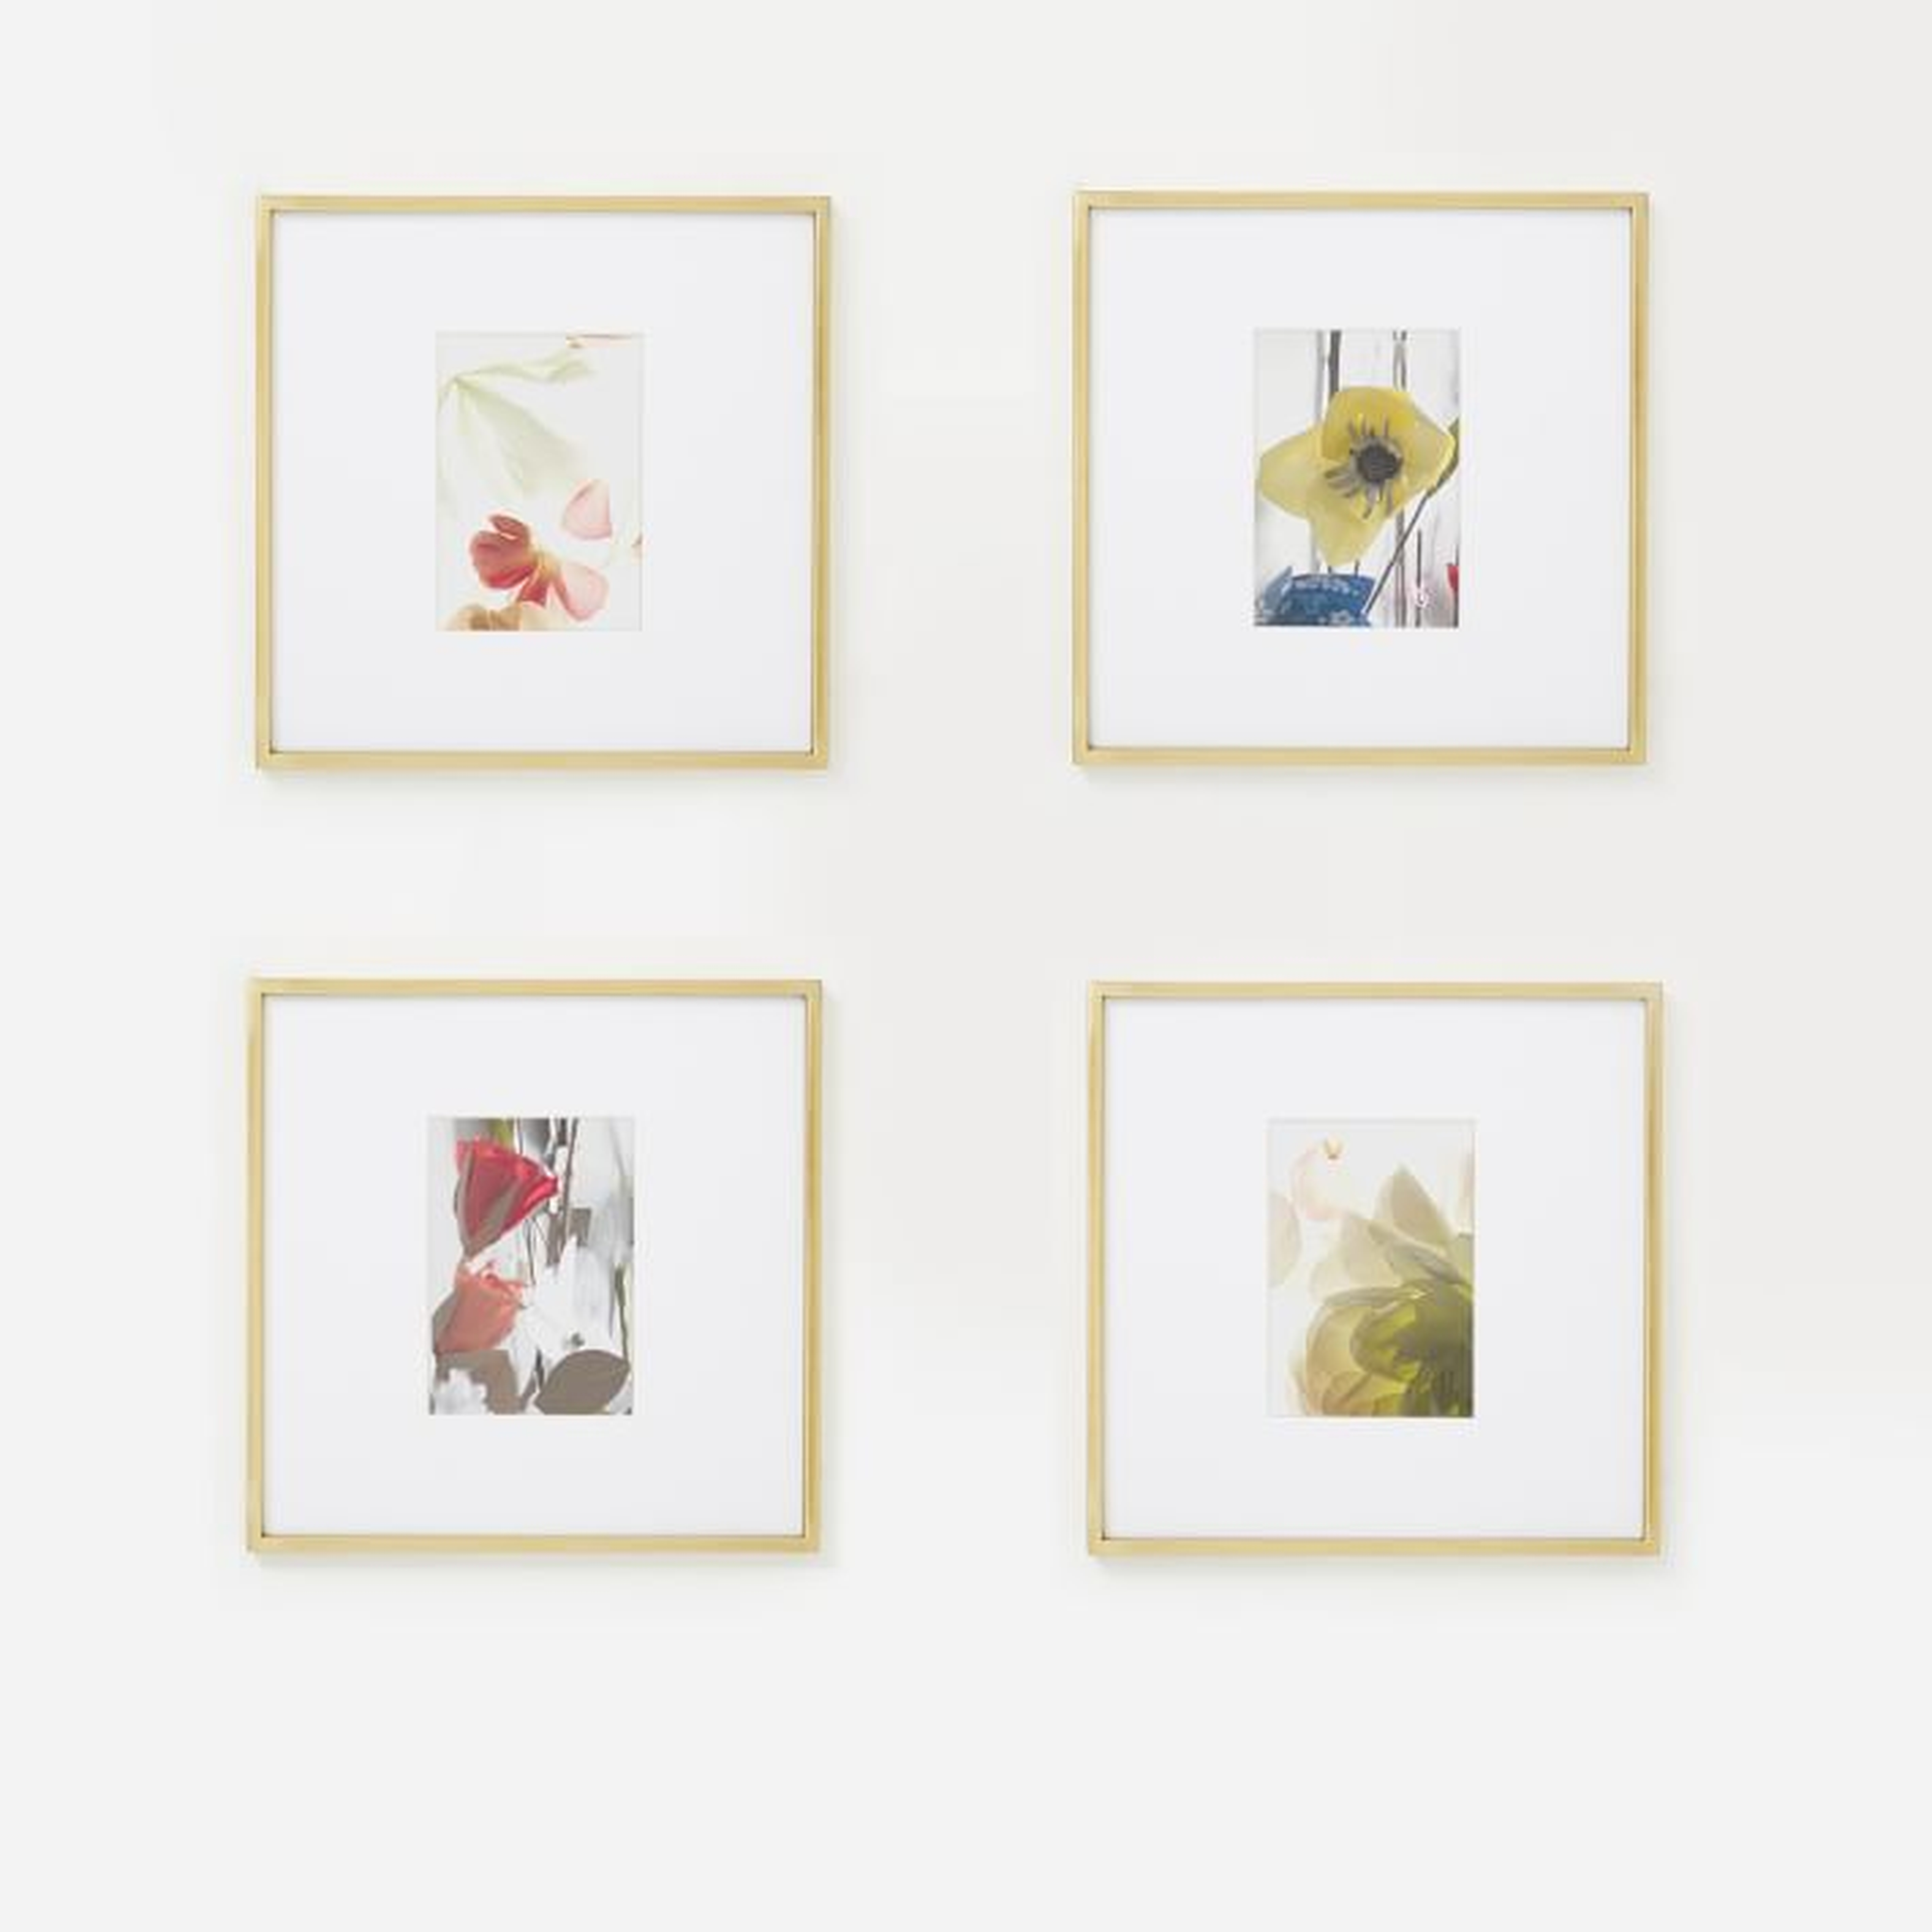 Gallery Frame, Polished Brass, Set of 4, 5" x 7" (12" x 12" without mat) - West Elm